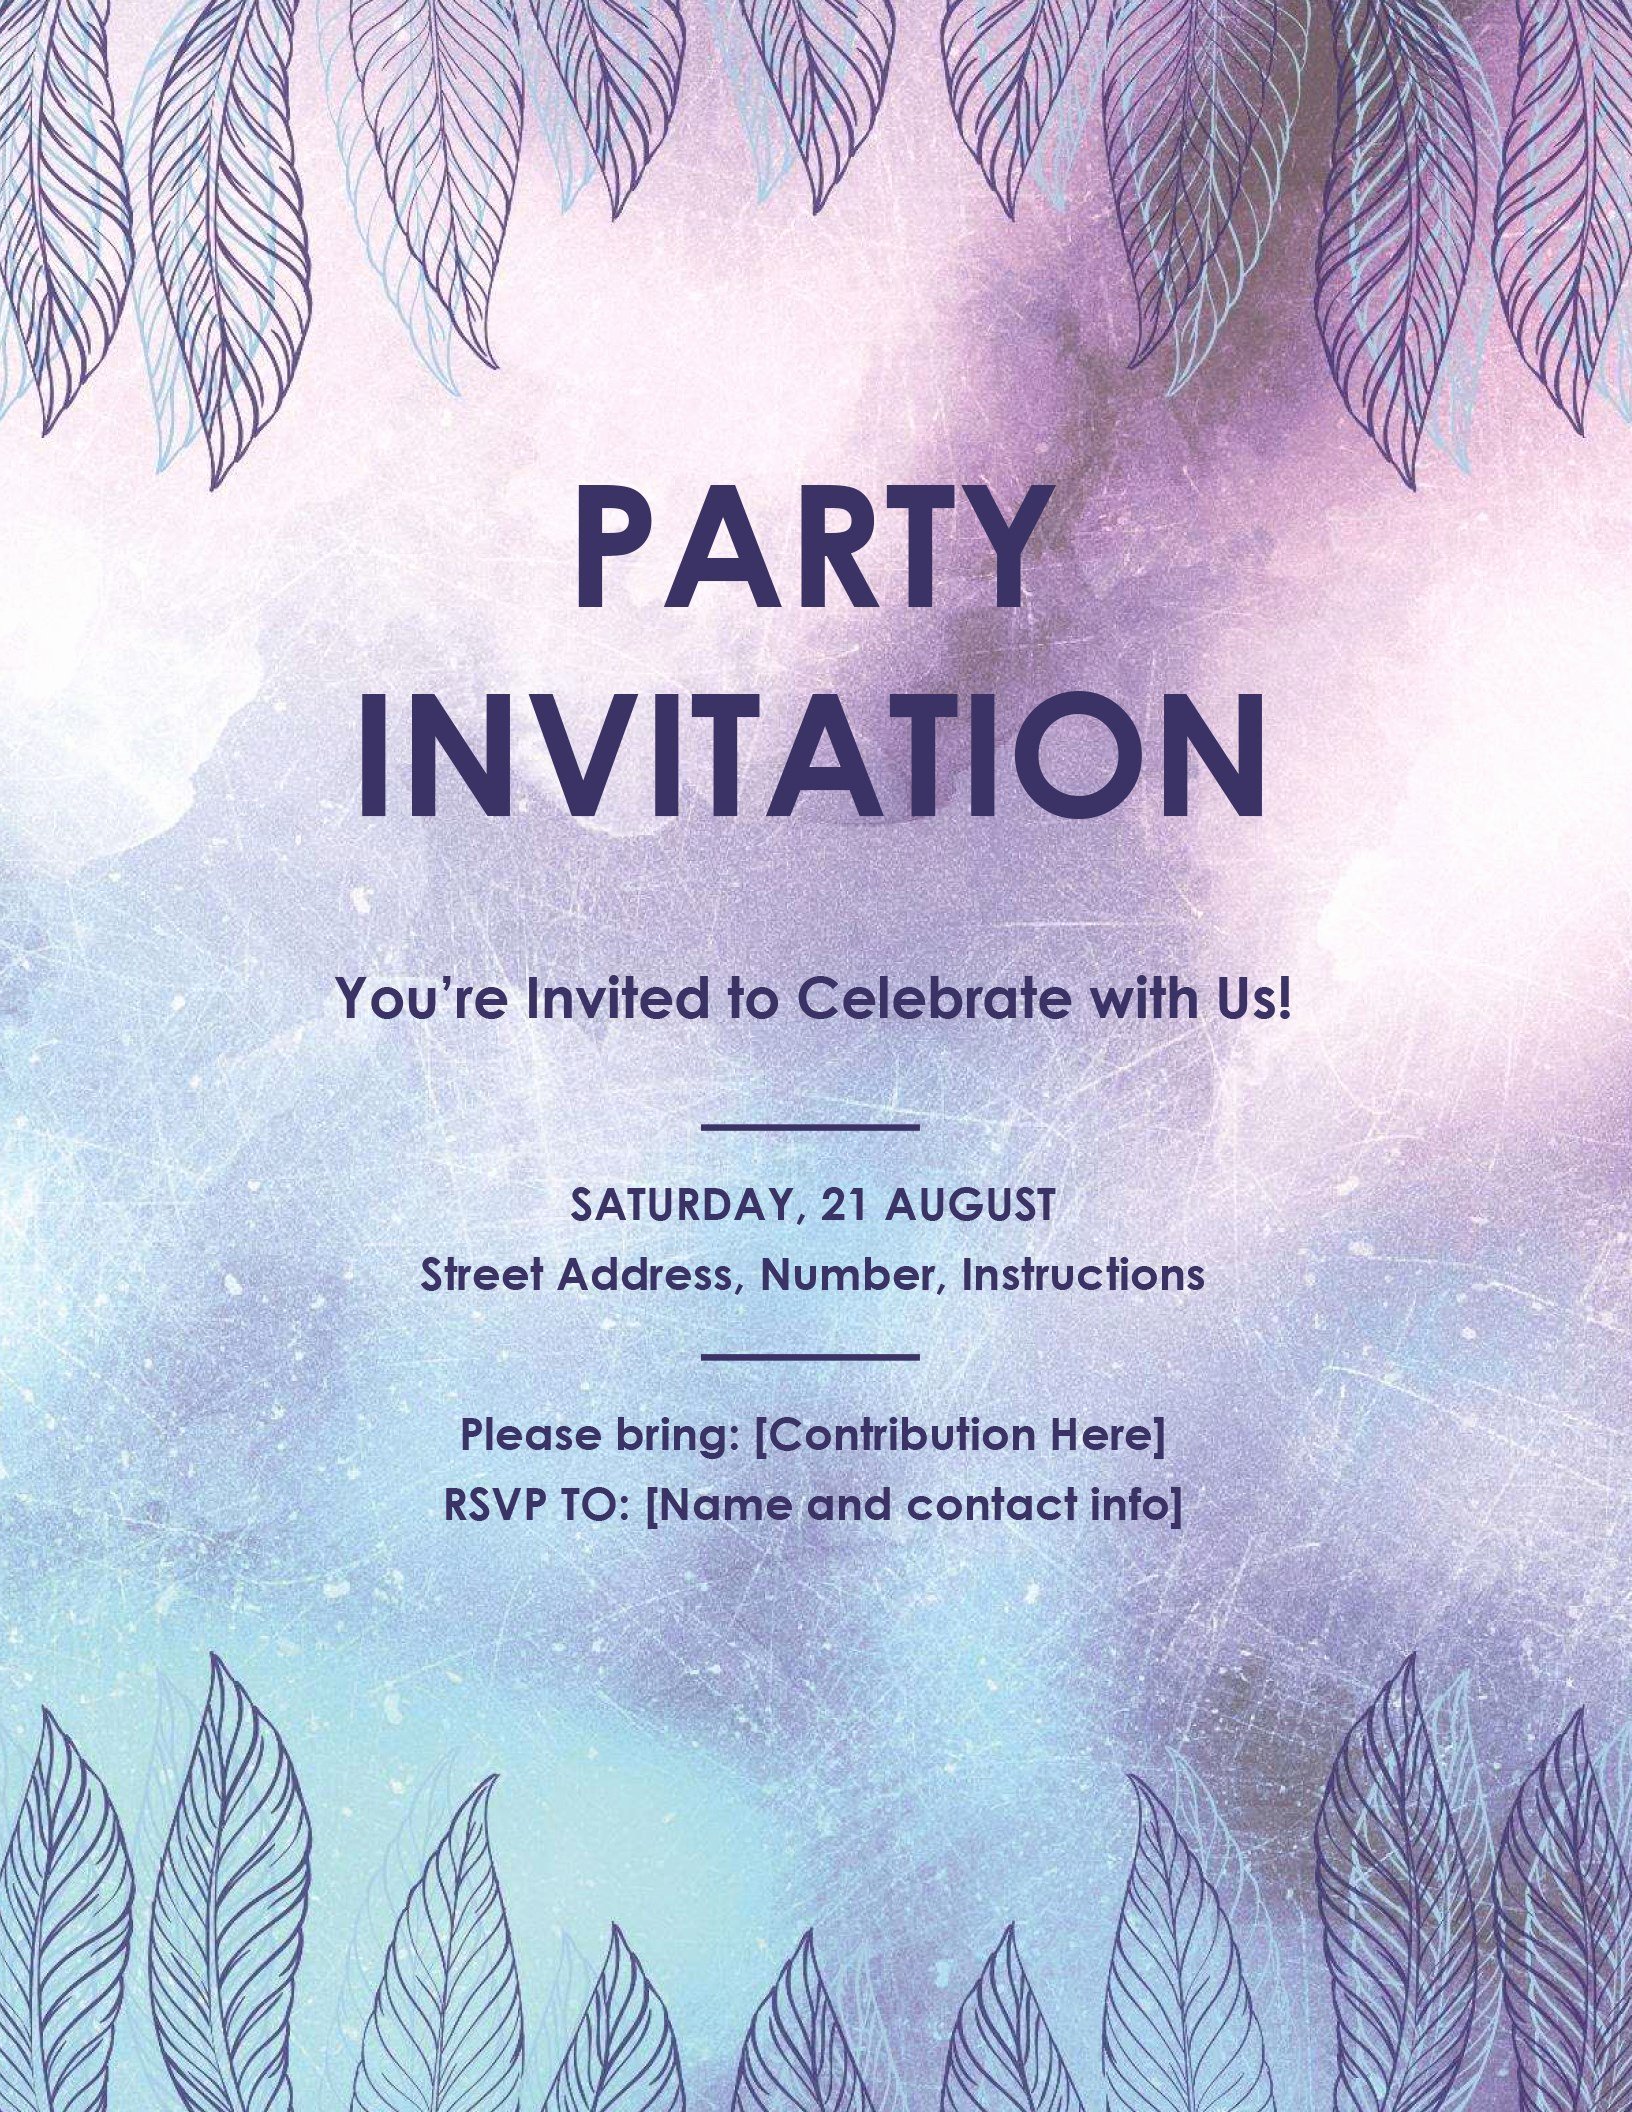 Party Invitation Template Microsoft Word New Party Invitation Flyer